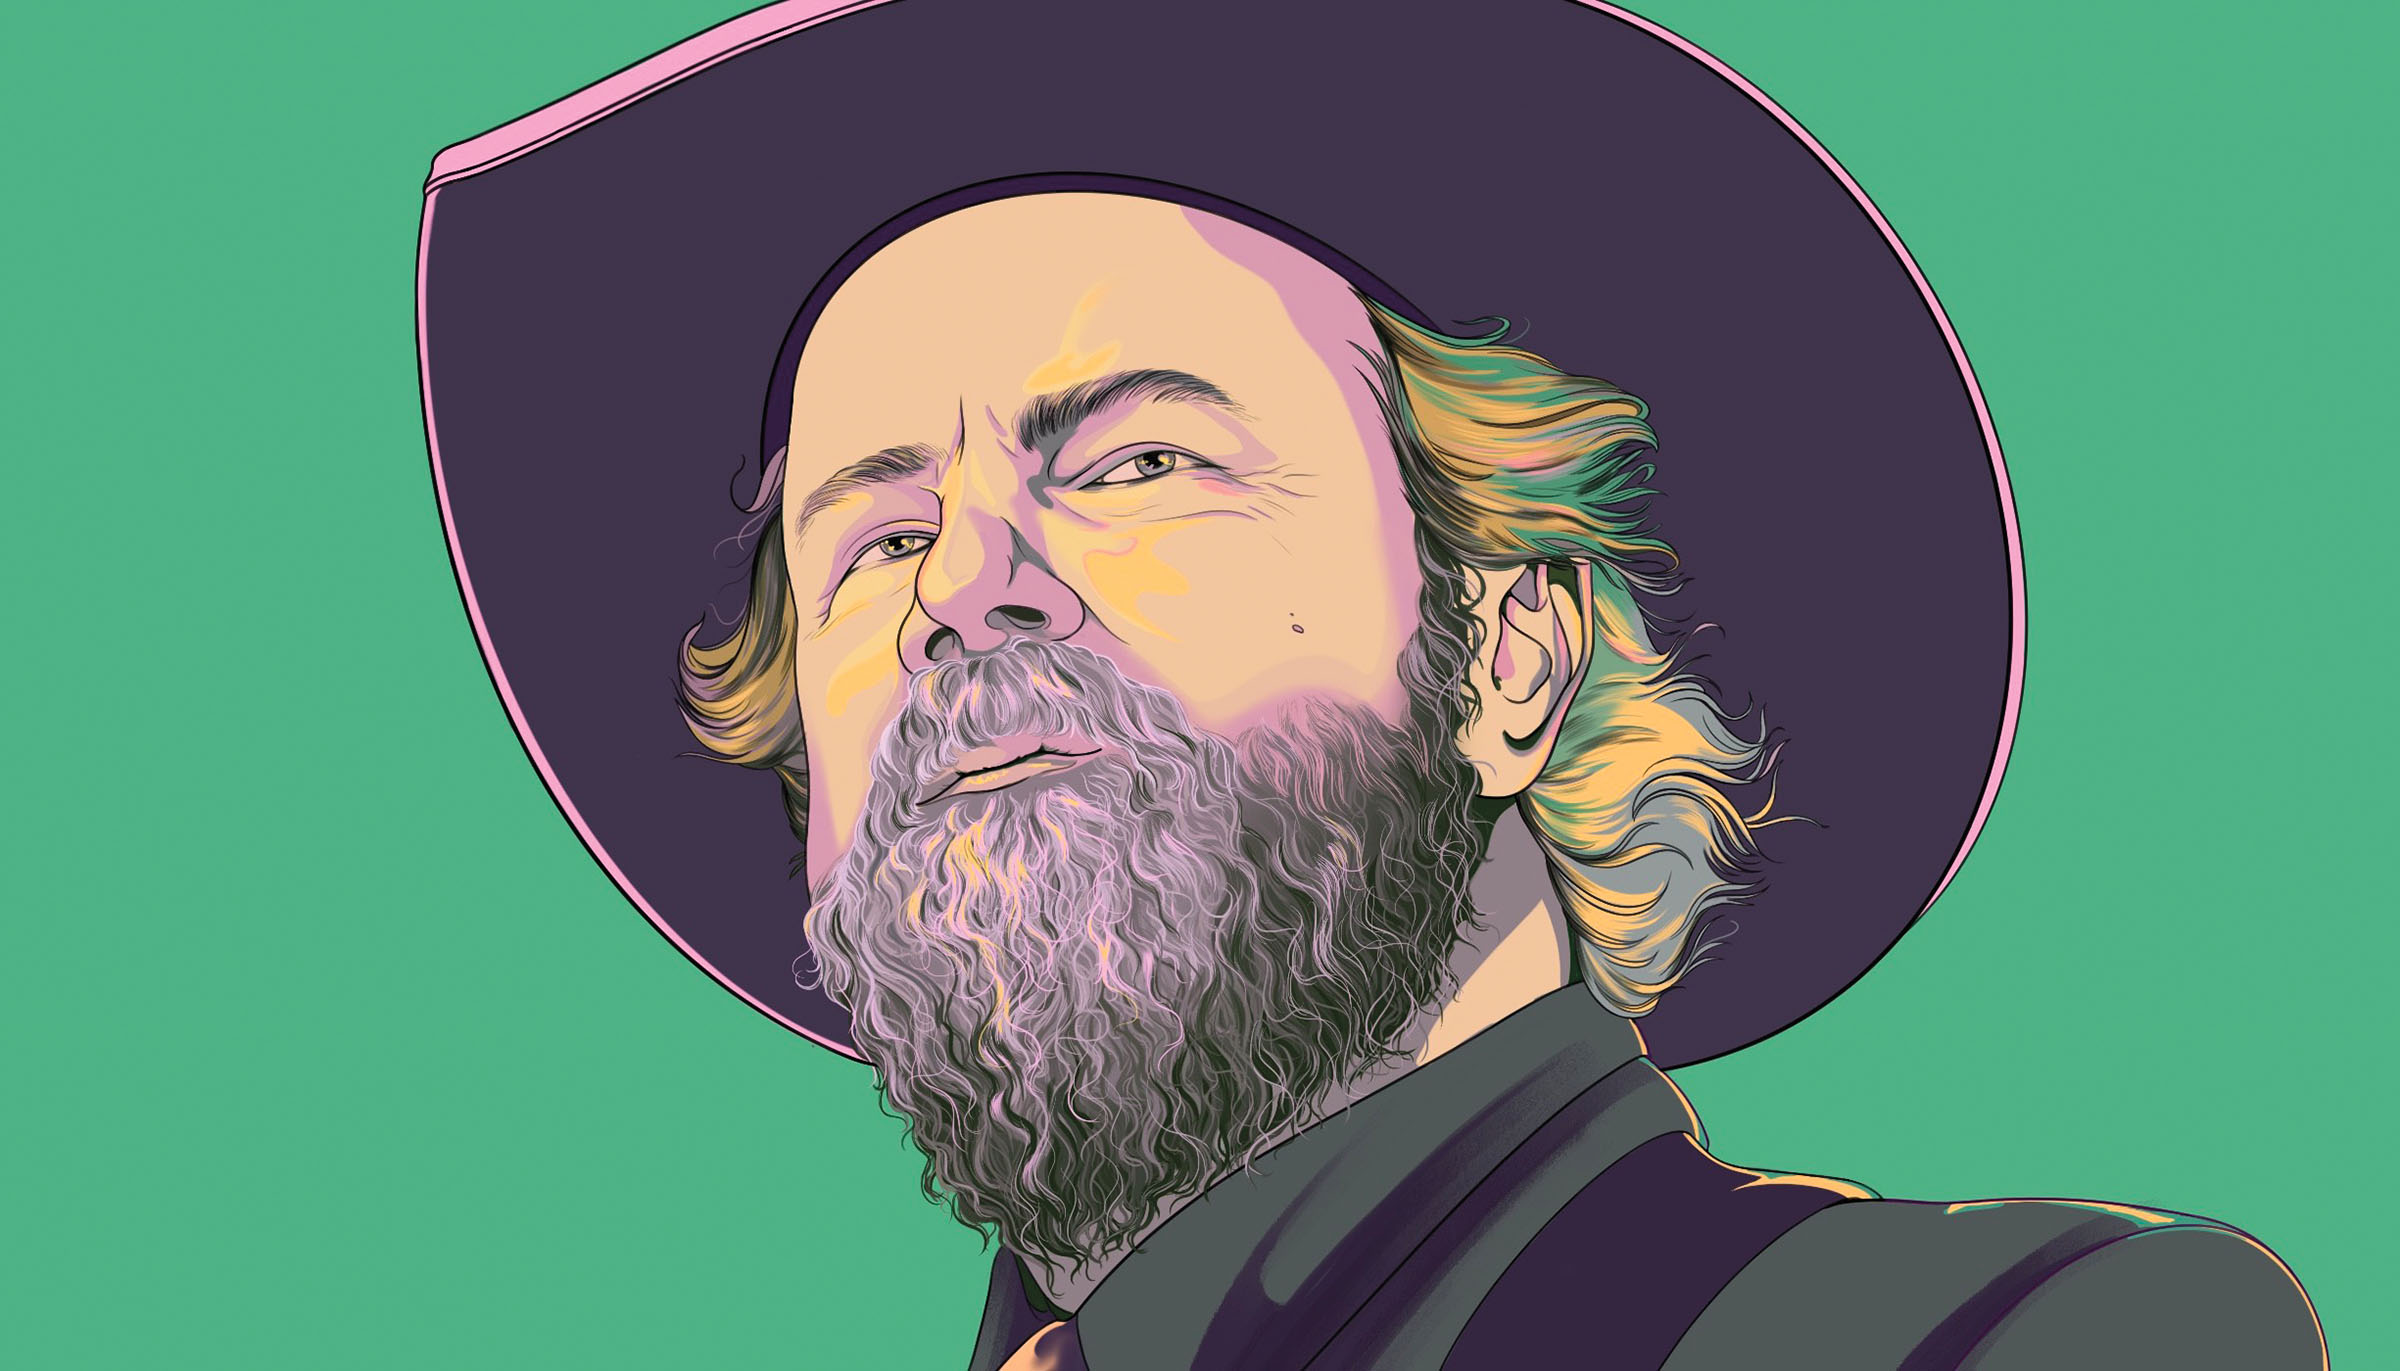 An illustration of a man in a cowboy hat with a large beard